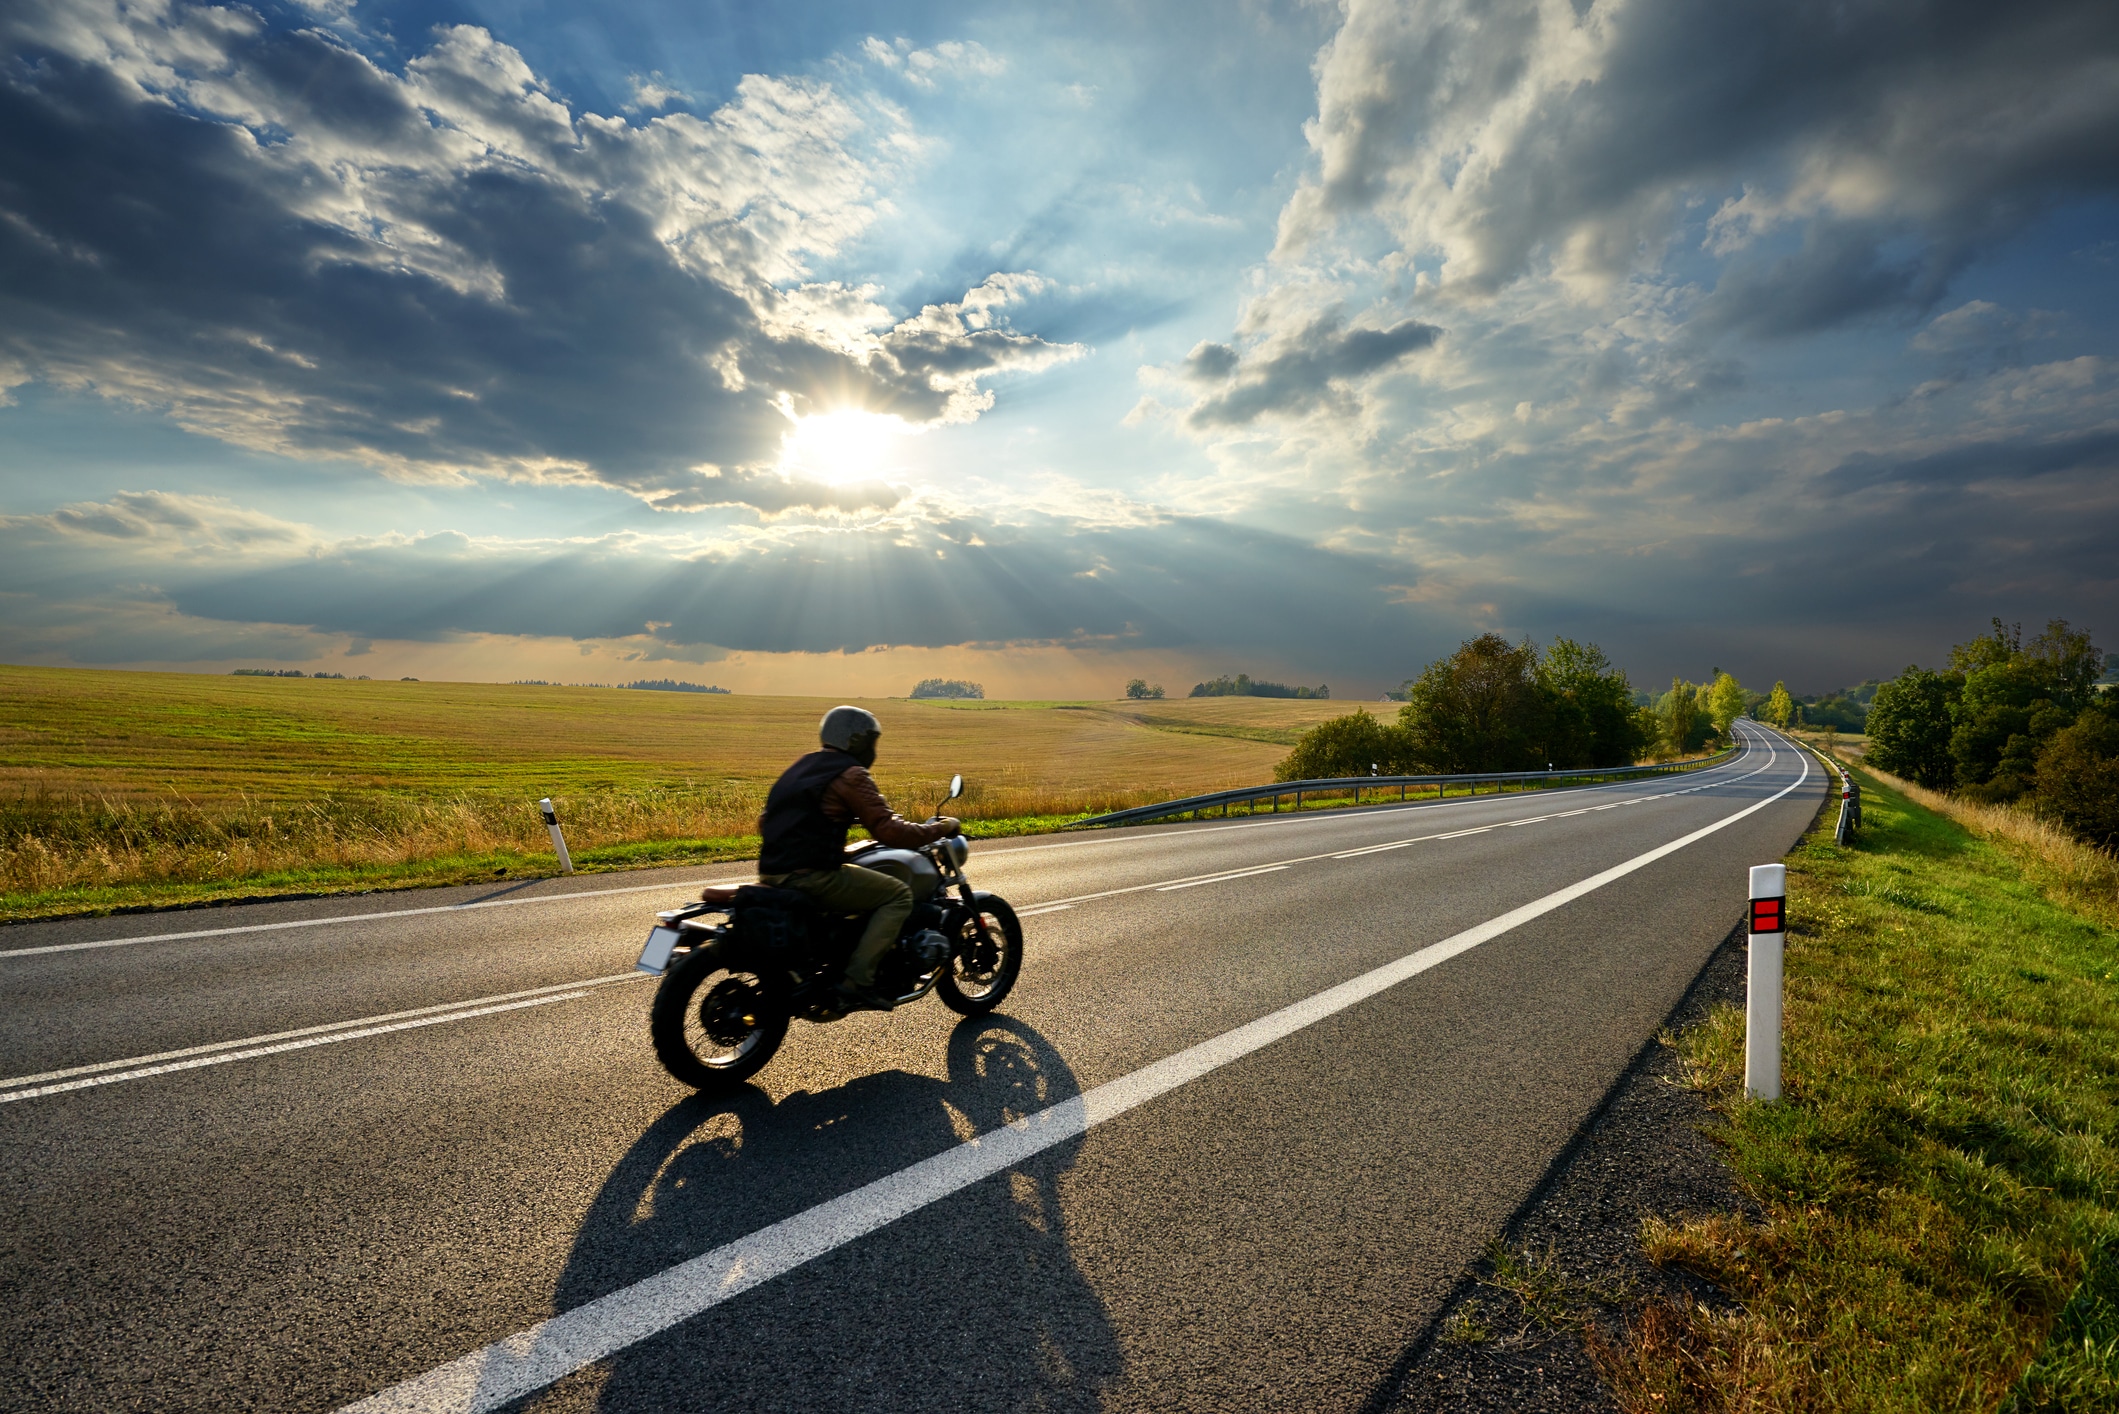 There Are Many Potential Causes of Motorcycle Accidents in the United States